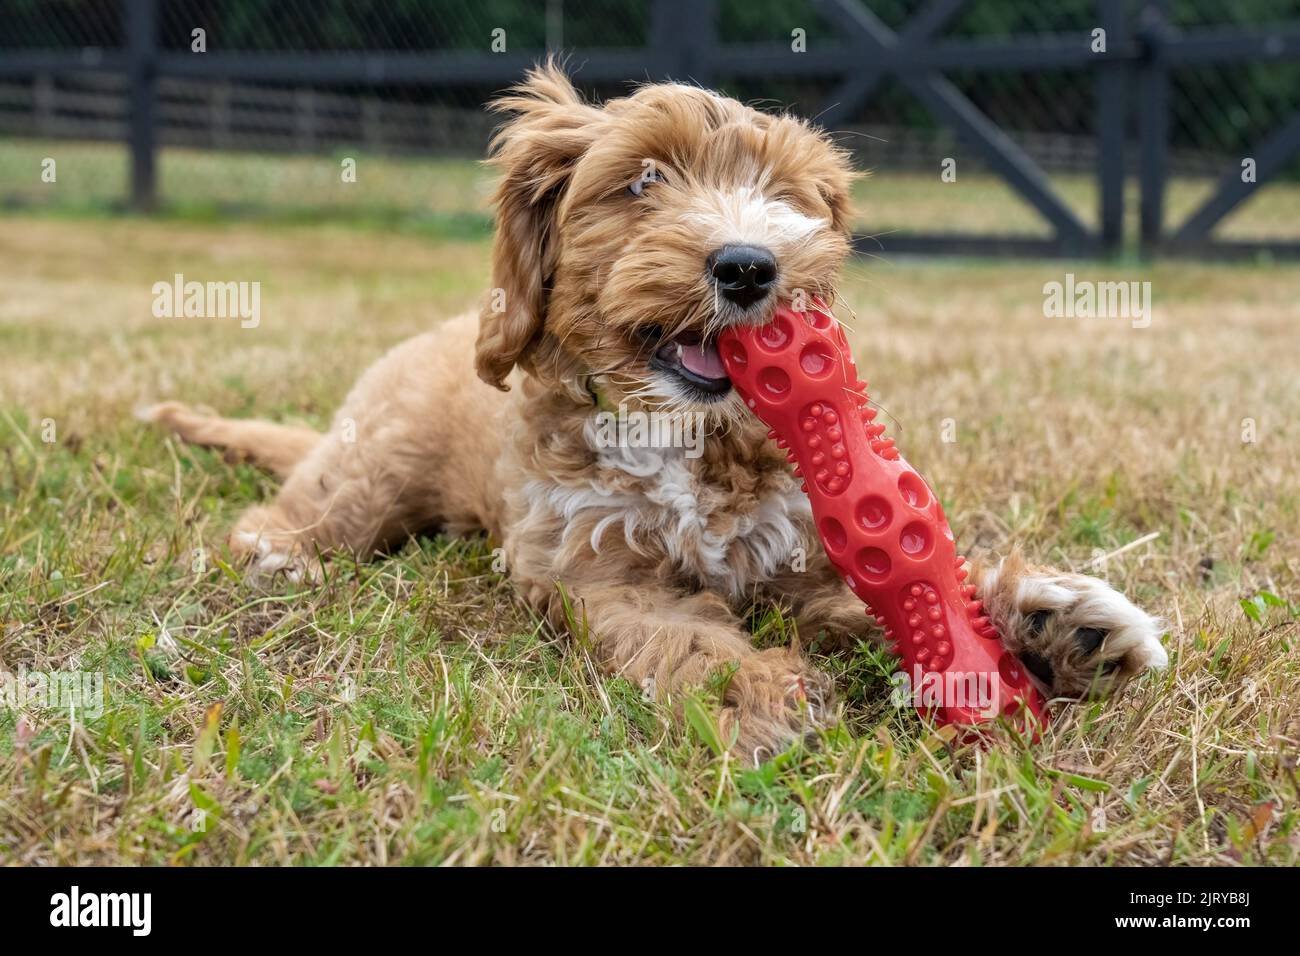 Issaquah, Washington, USA.  3-month old Aussiedoodle puppy named 'Bella' chewing on a red plastic toy.  (PR) Stock Photo